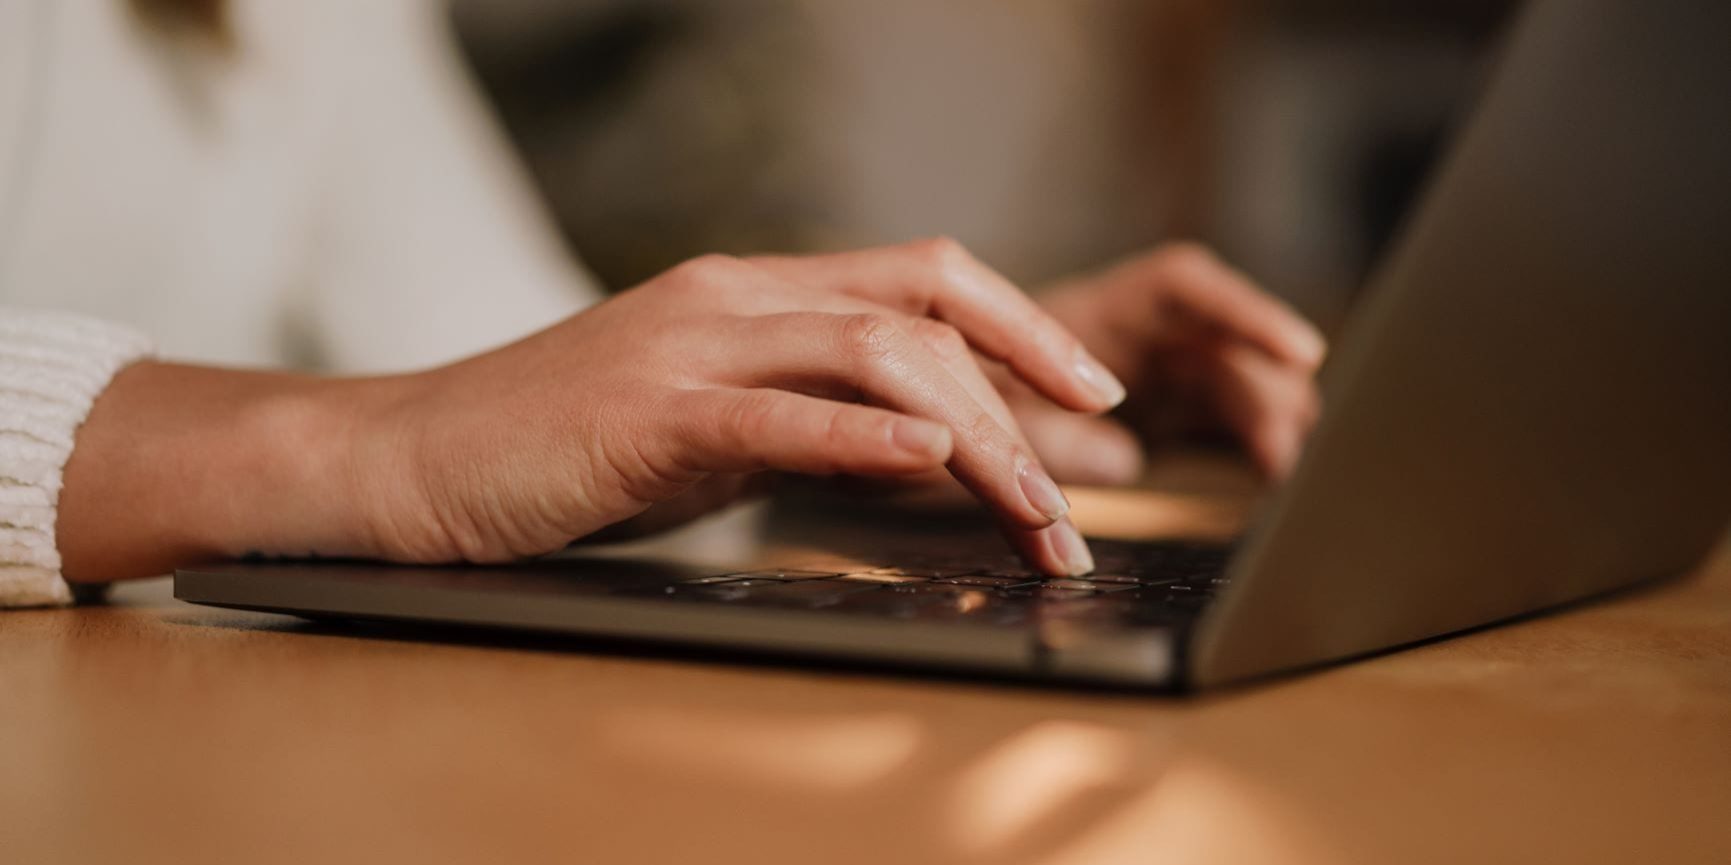 A close-up of the person's hands typing on a laptop keyboard, with only a tiny portion of the person's wrist visible in the frame